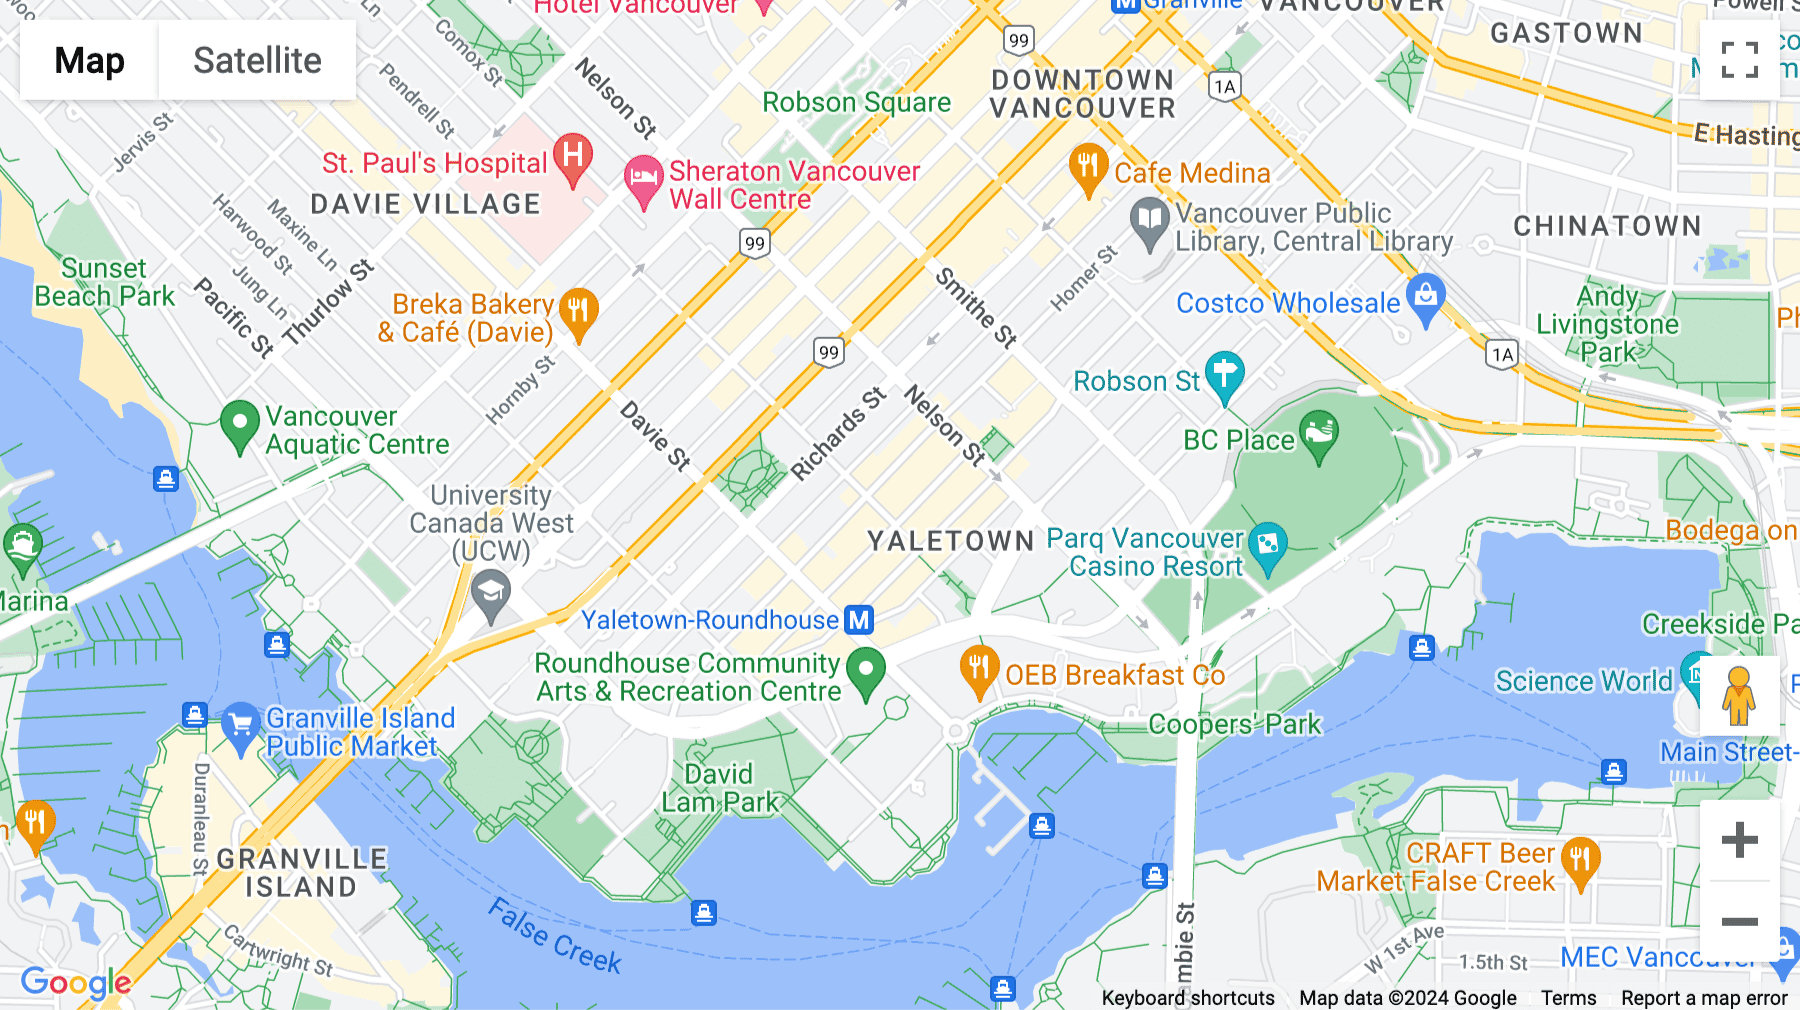 Click for interative map of 1090 Homer Street, Suite 300, Vancouver, British Columbia, Vancouver